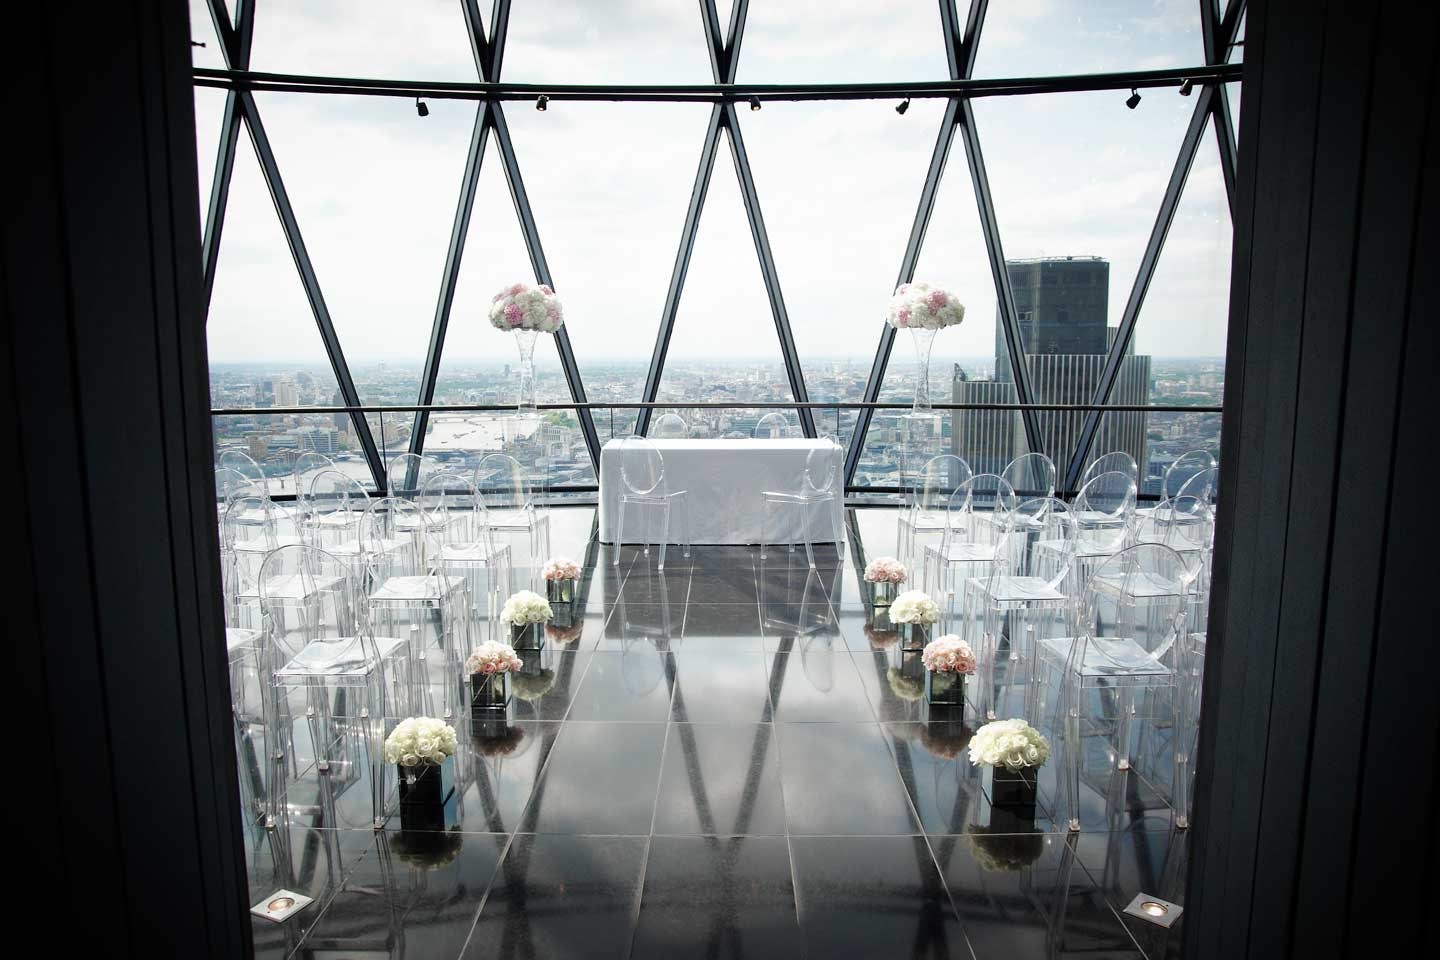 Searcys at the Gherkin - Exclusive hire of Helix and Iris image 7